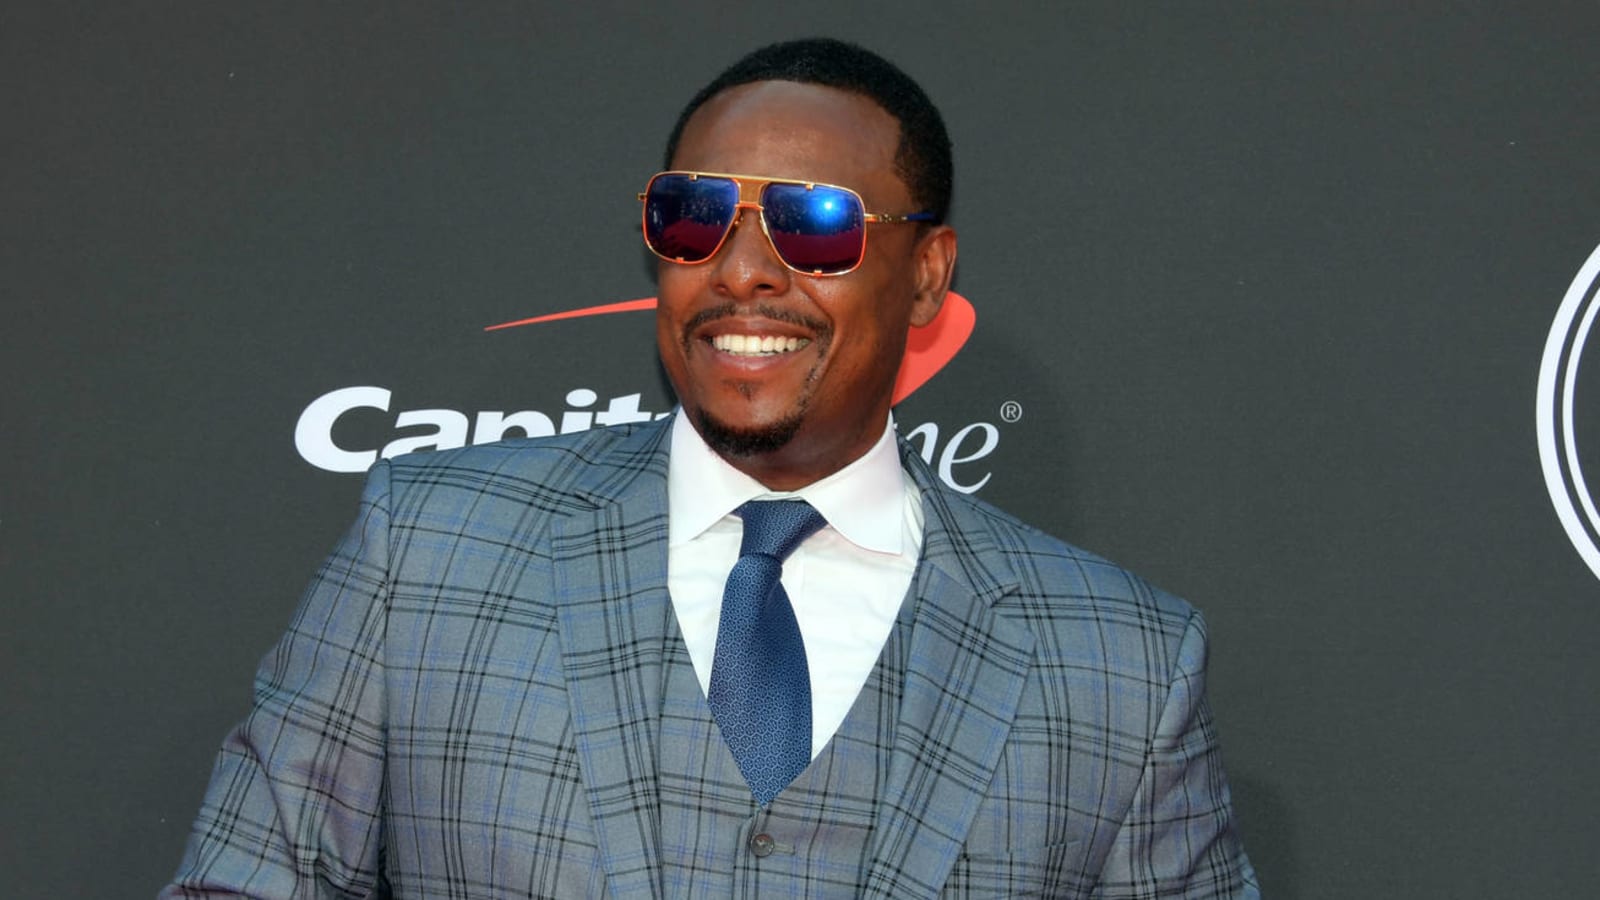 Paul Pierce posts video response after being fired by ESPN